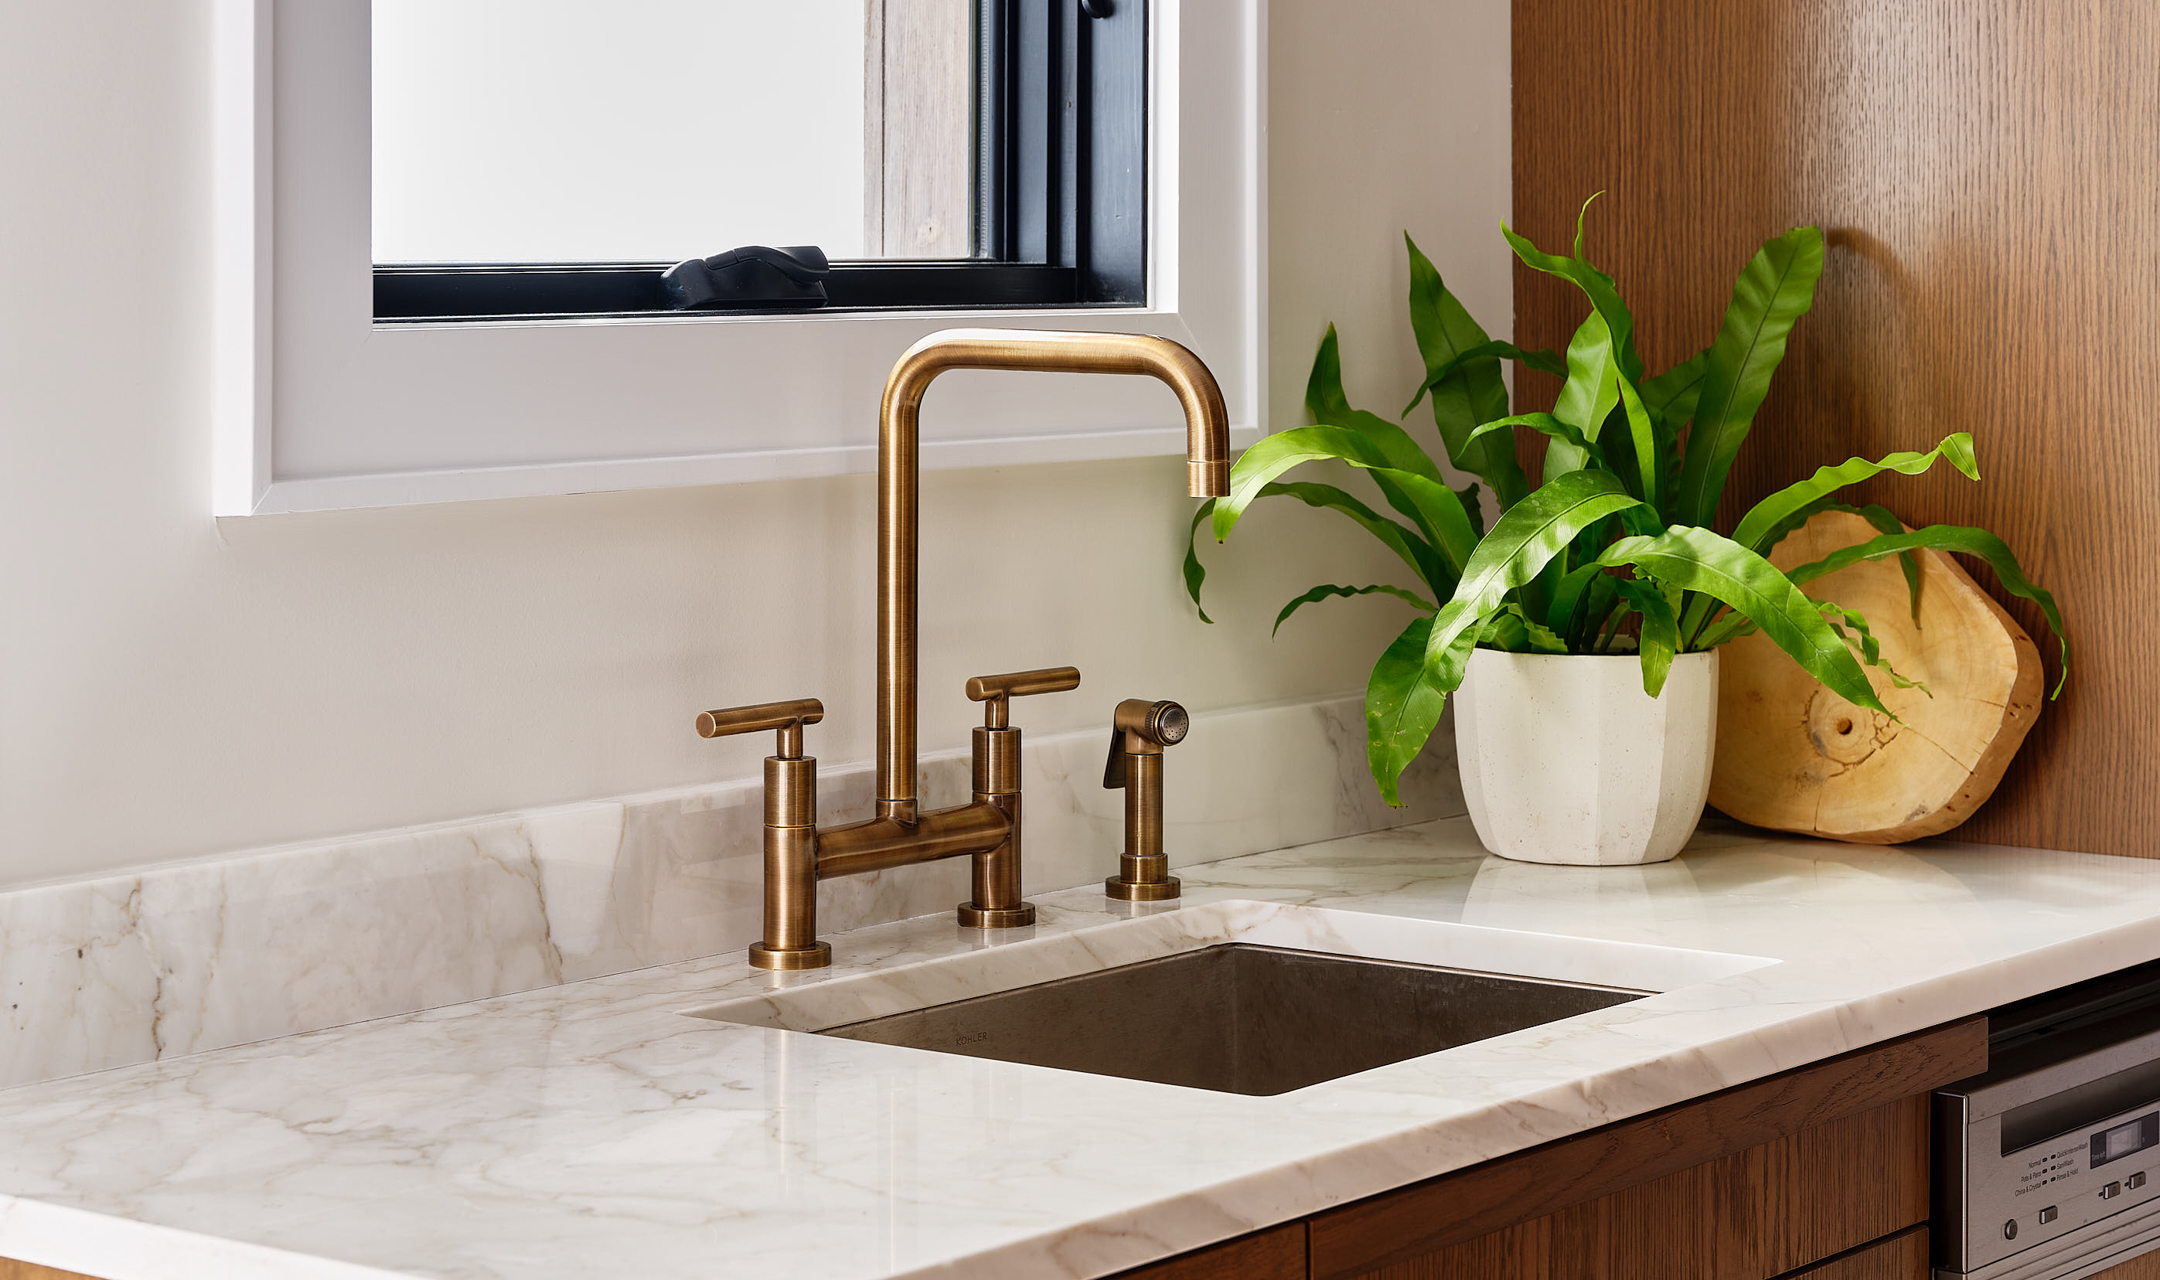 Kitchen sink with bronze fixtures and potted plant.